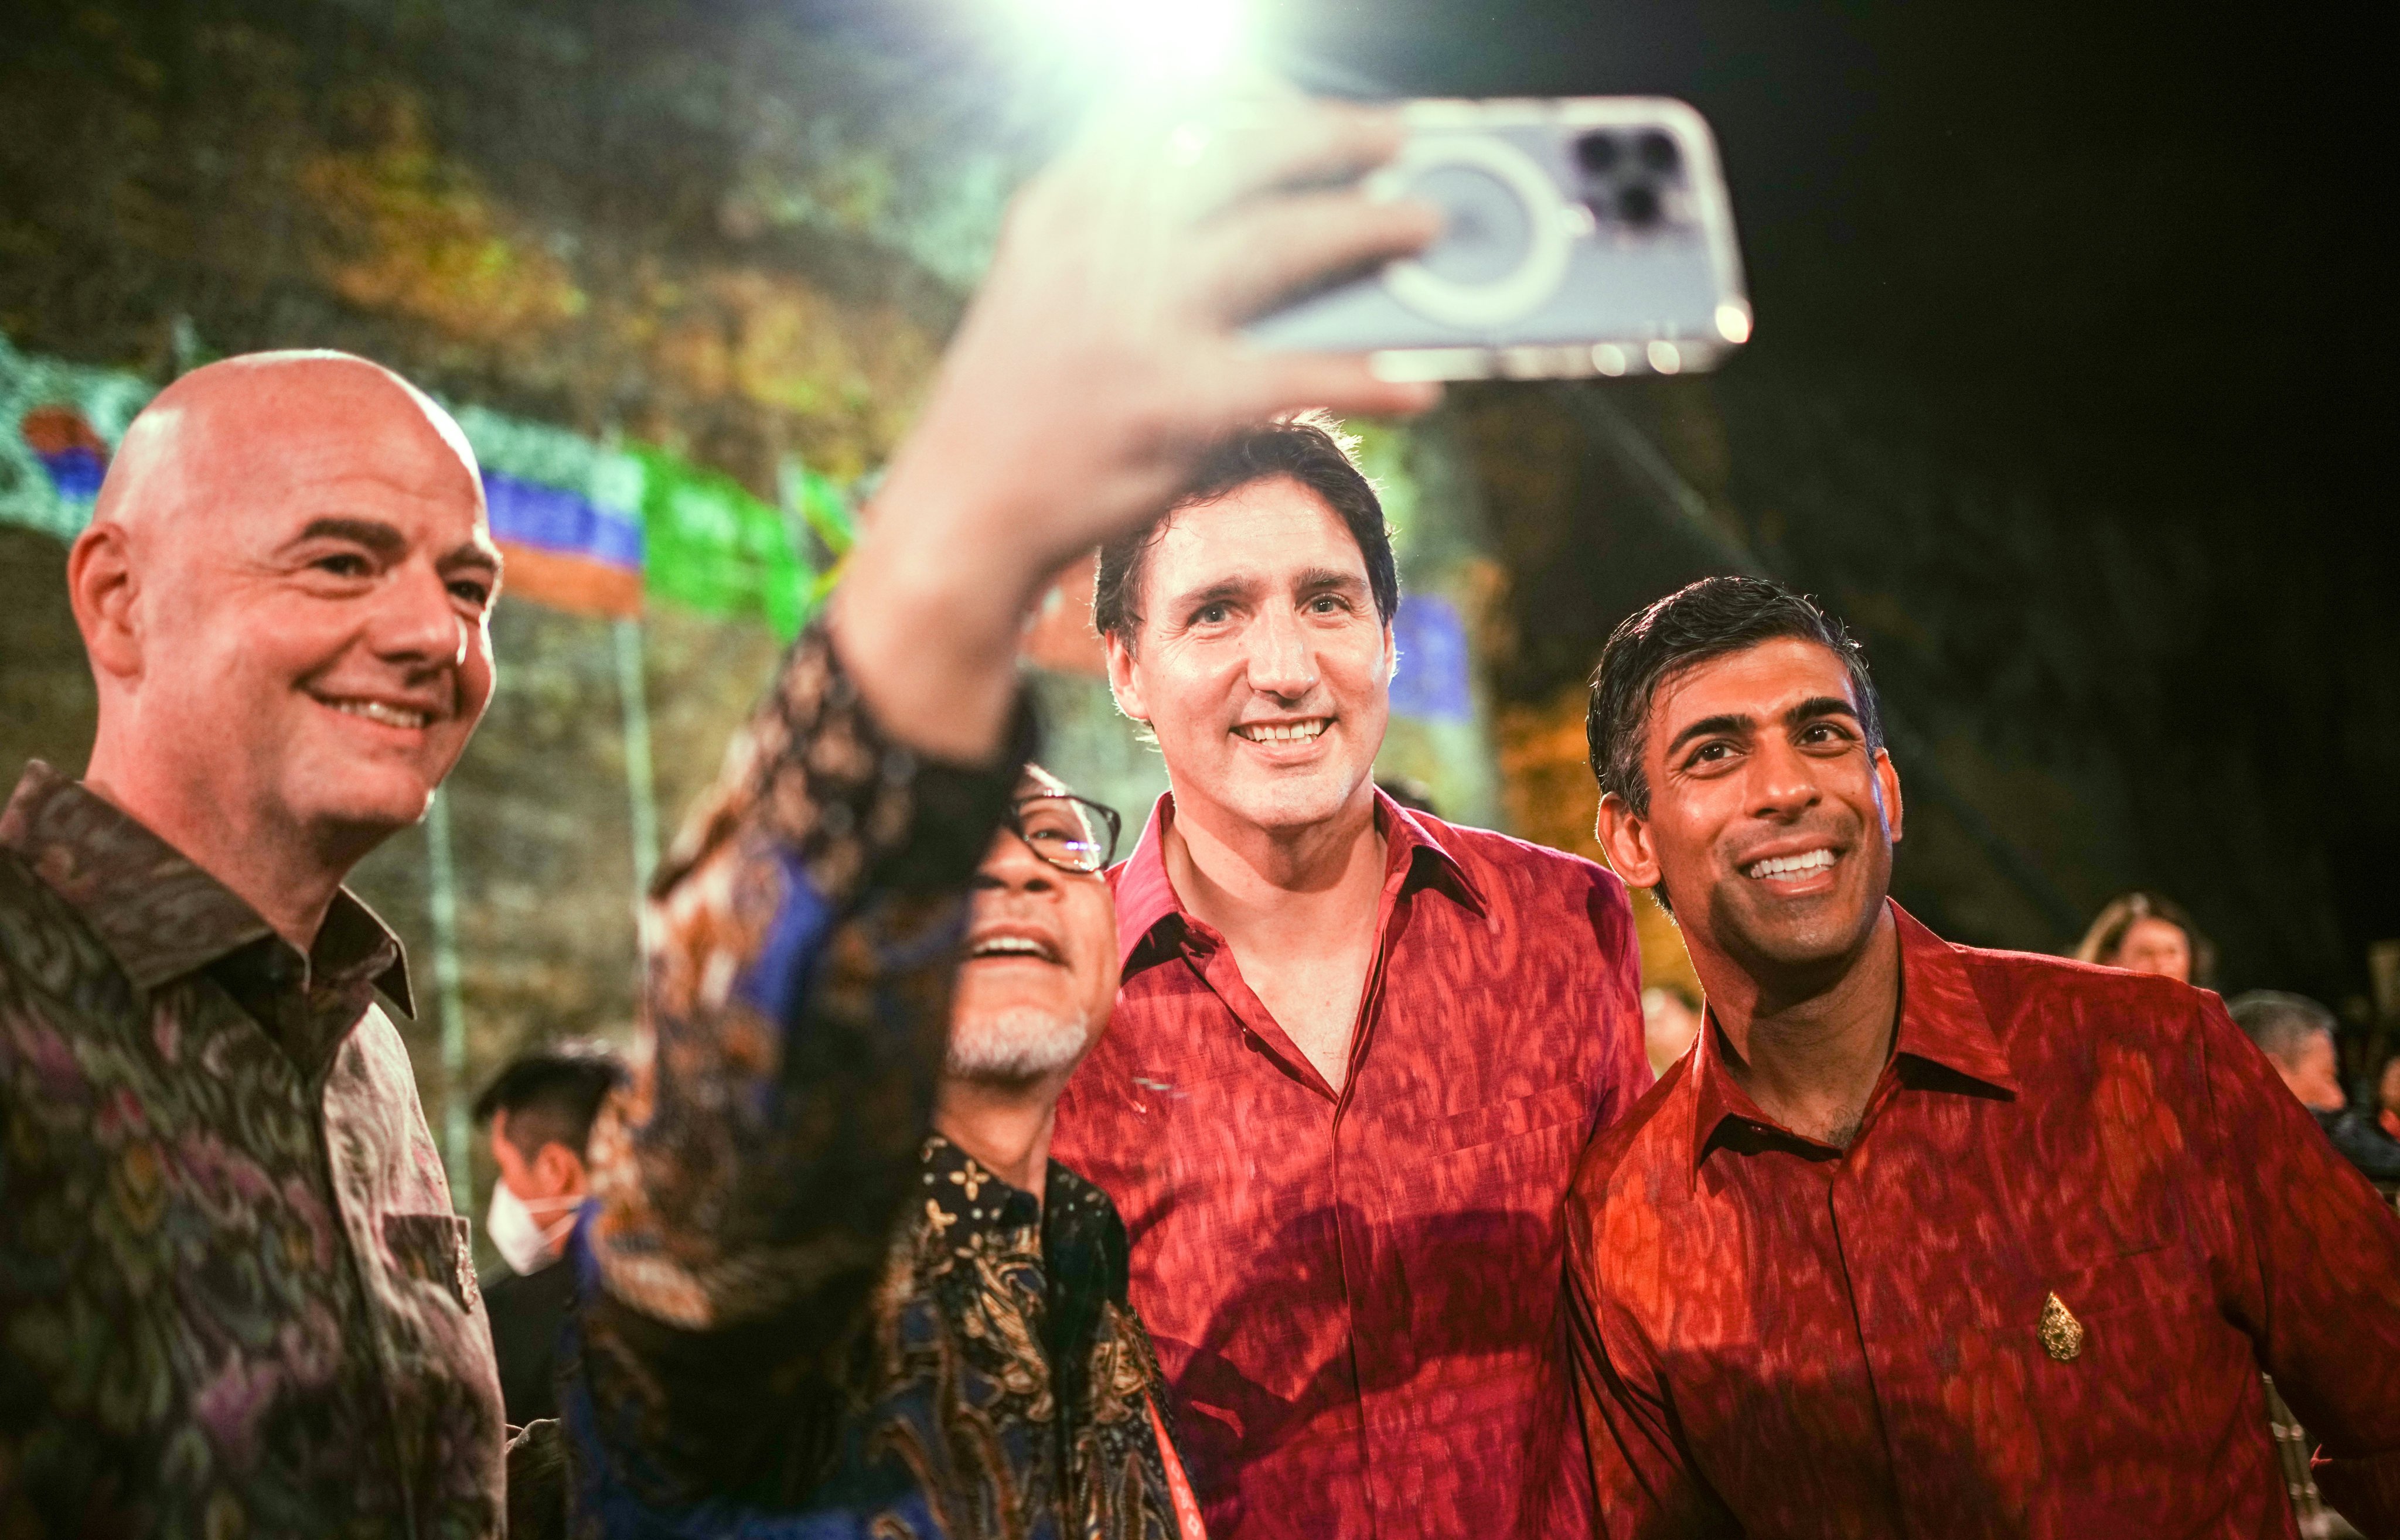 Canadian Prime Minister Justin Trudeau and UK Prime Minister Rishi Sunak (right) wear matching red shirts at a dinner on the sidelines of the G20 Summit in Bali, Indonesia. Photo: Kay Nietfeld/dpa